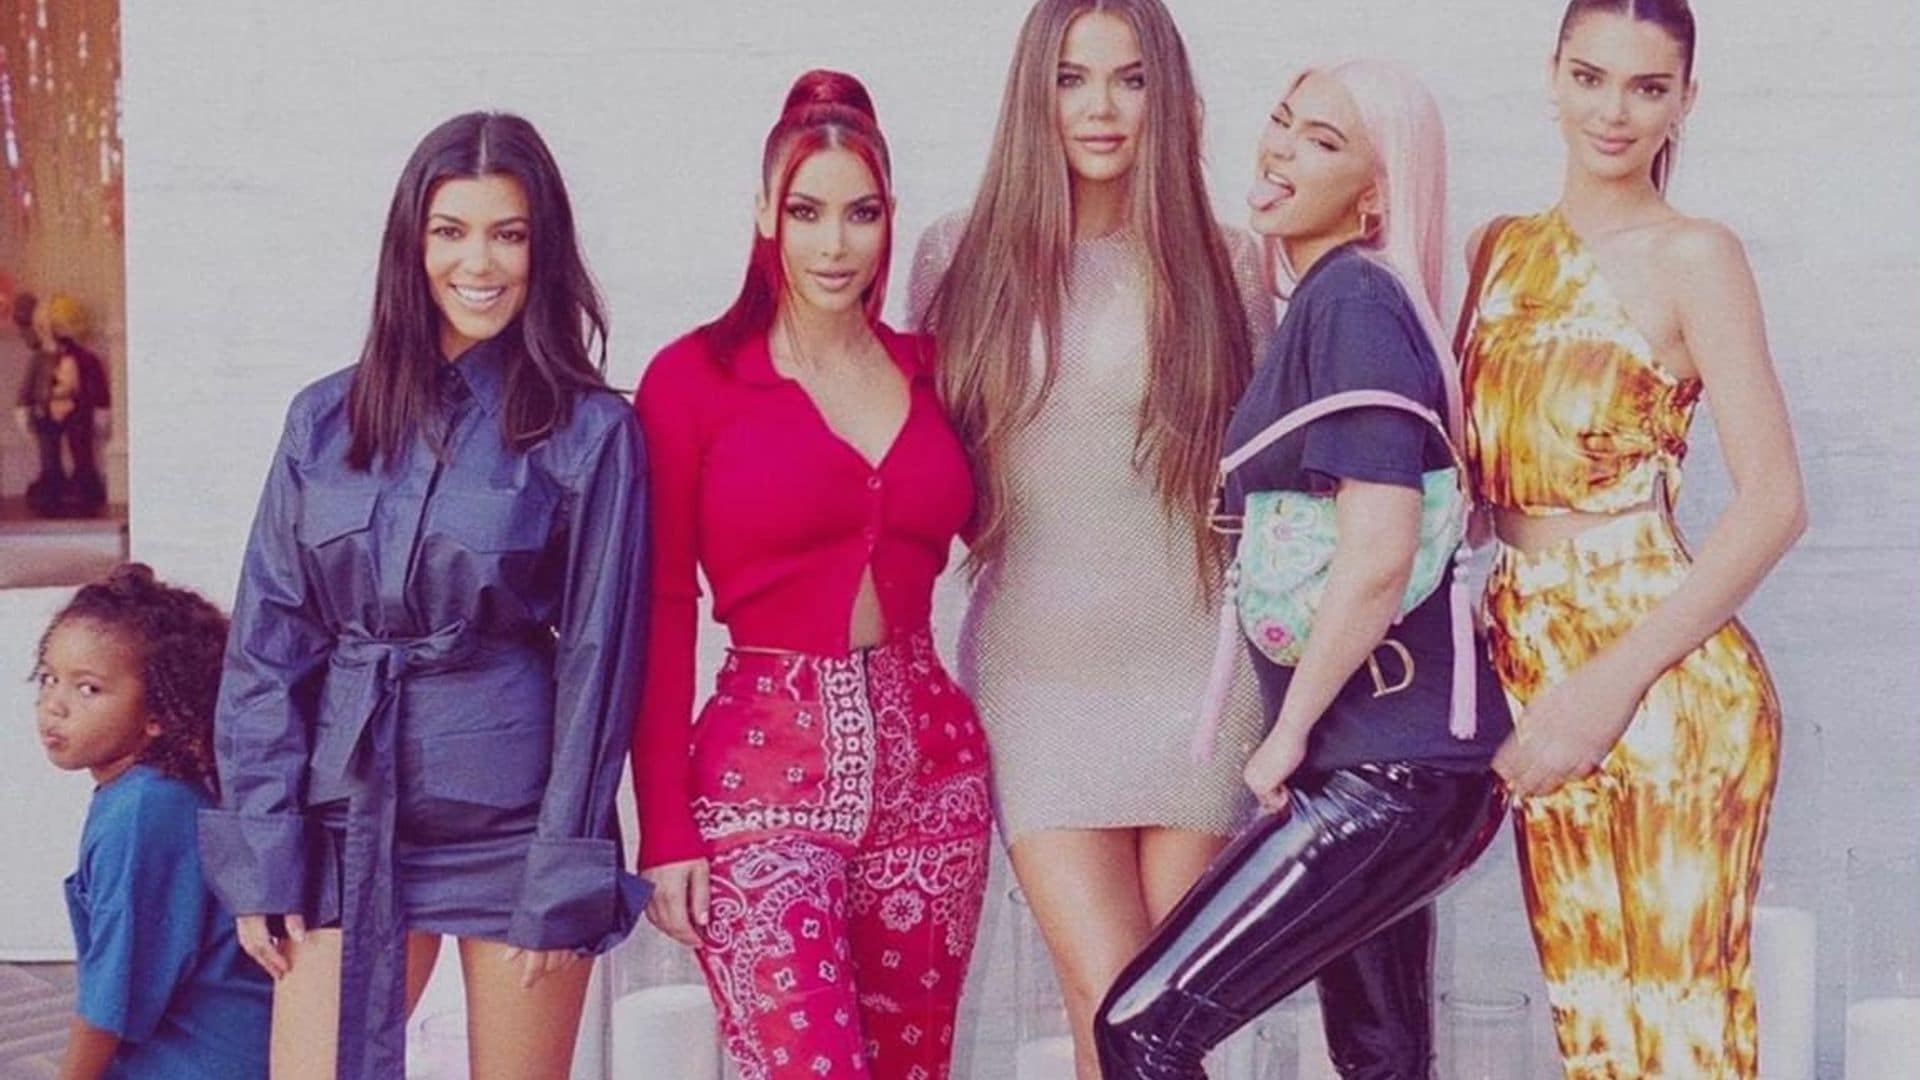 Kim Kardashian posts Spice Girls inspired picture with her sisters crashed by Saint